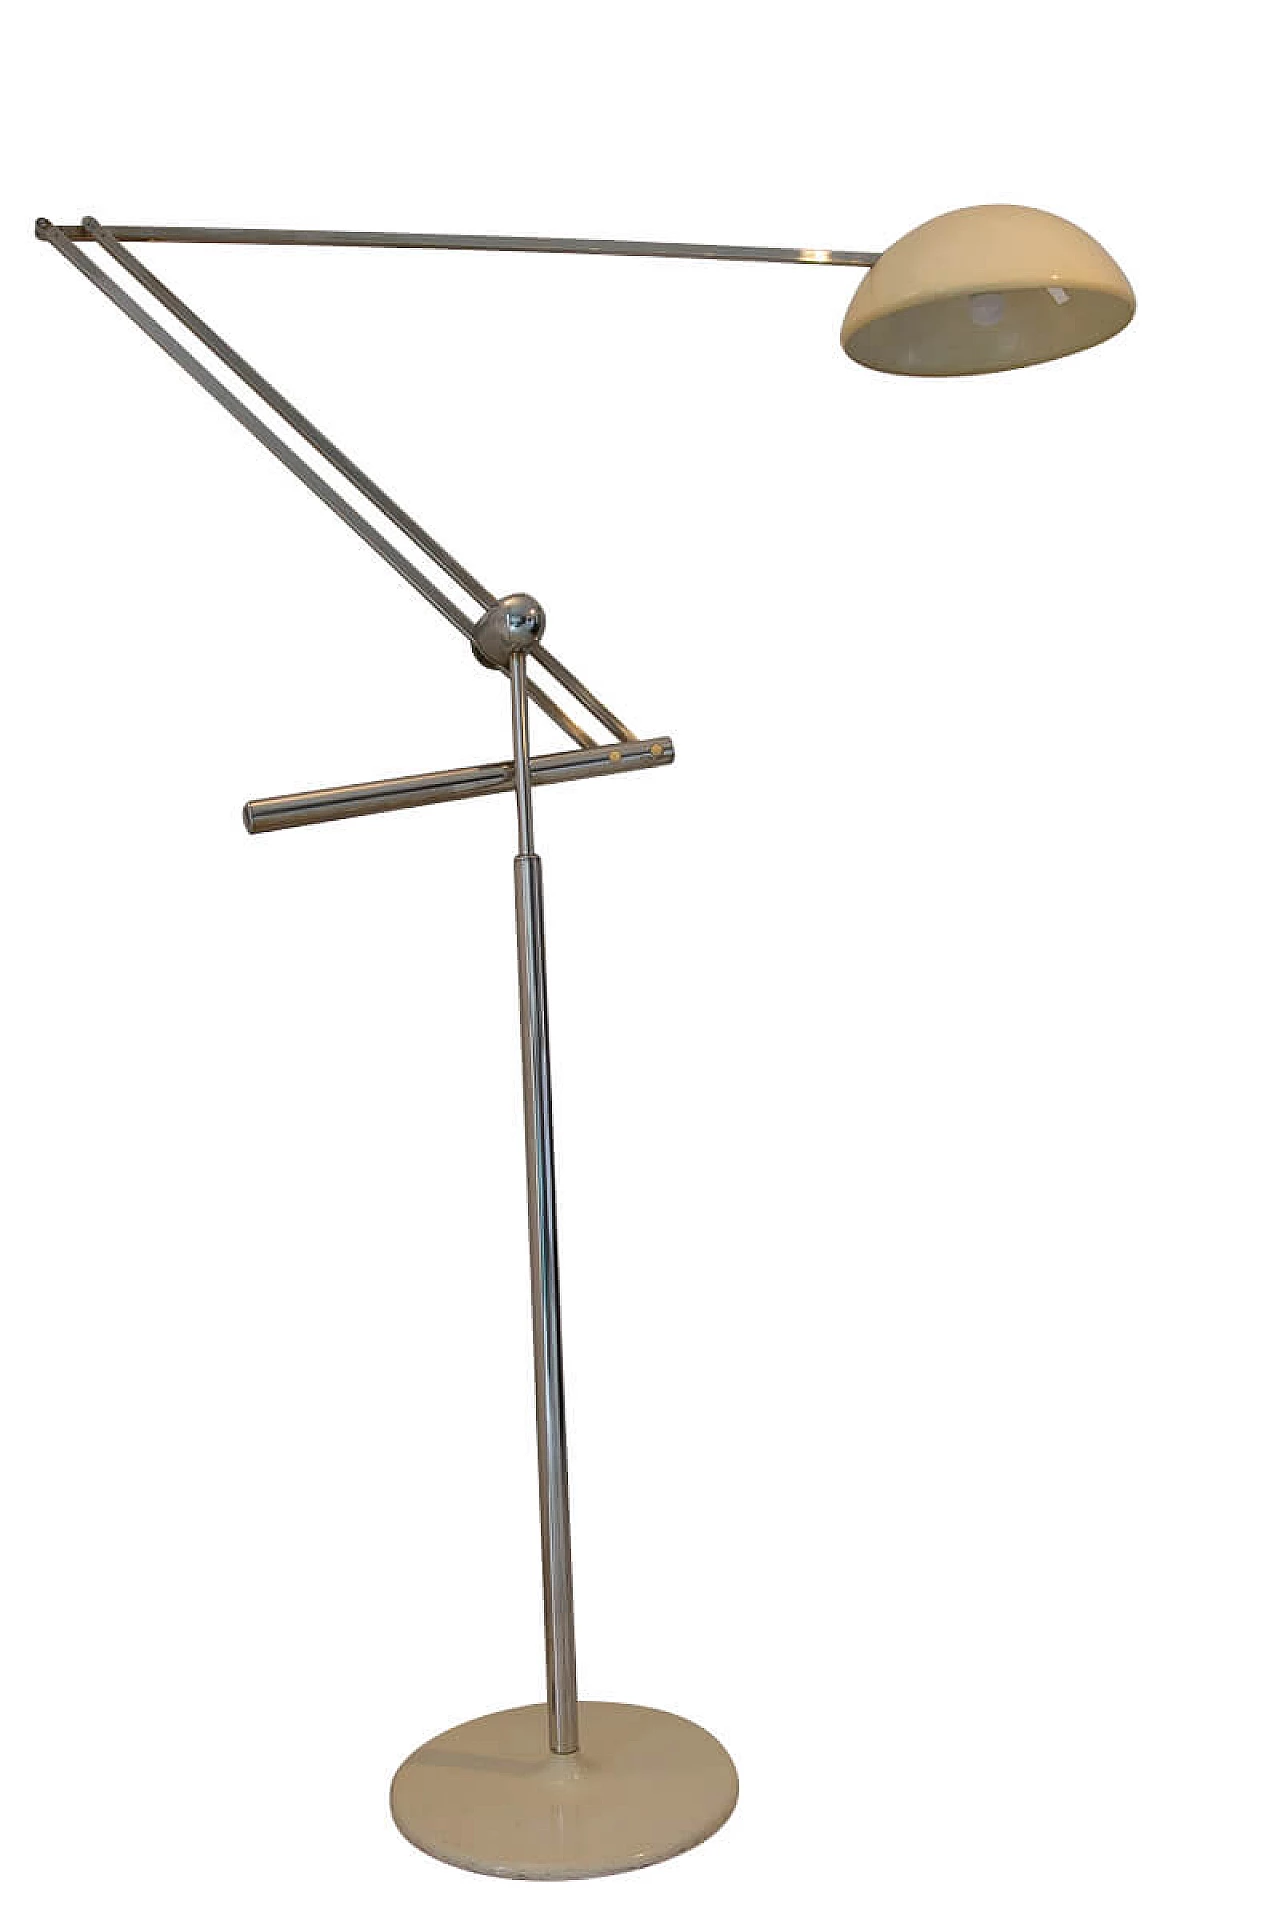 Floor lamp with counterweight mod. 633 by Goffredo Reggiani 1191830